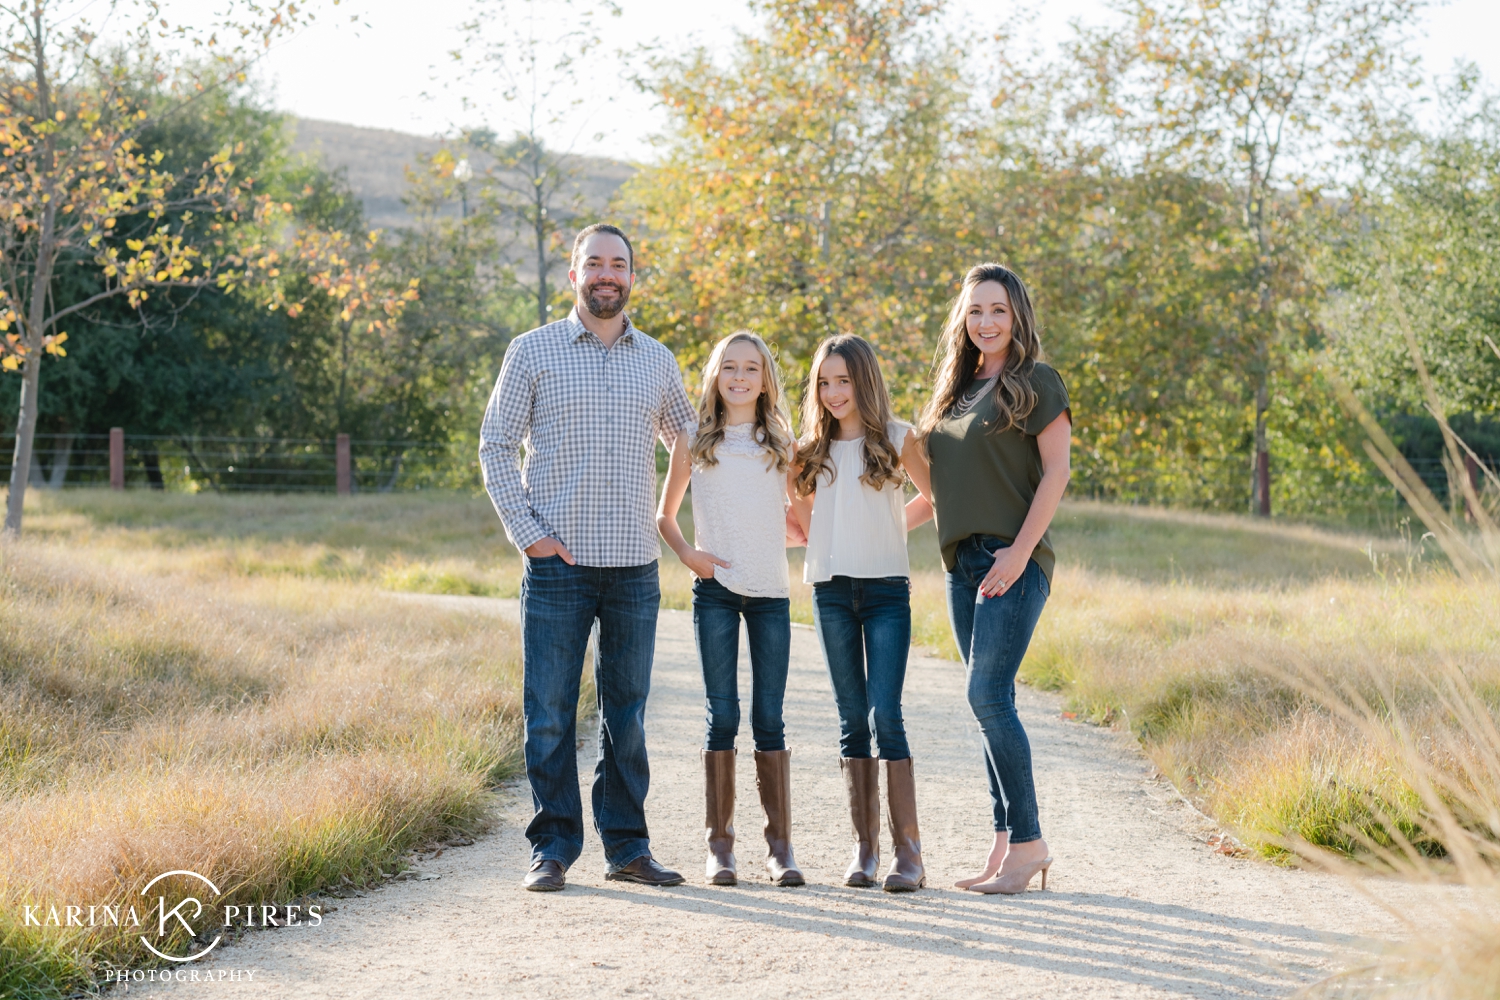 Family session at Quail Hill in Irvine, California